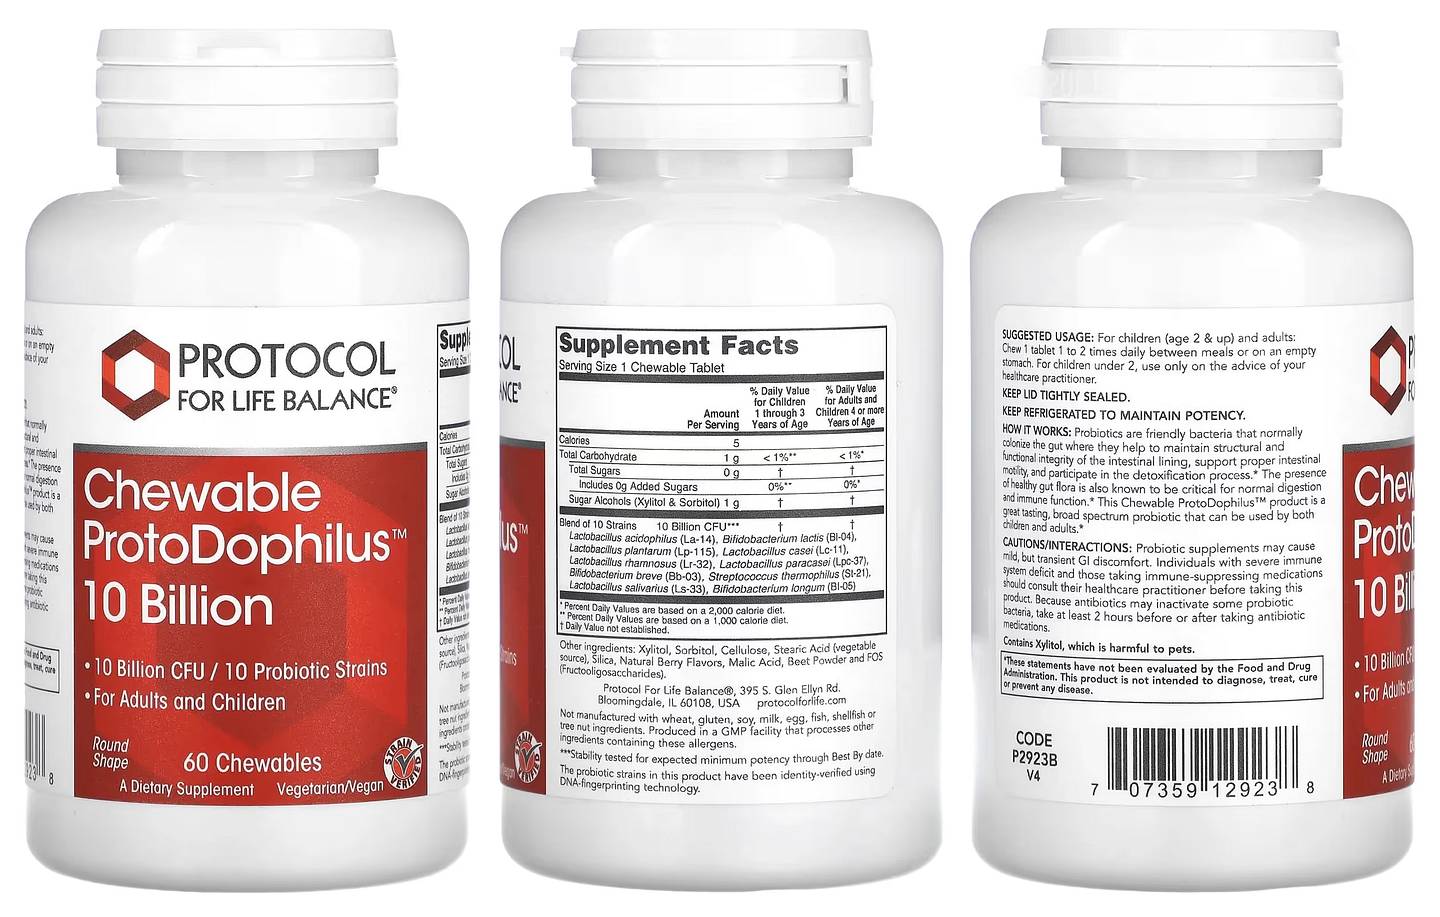 Protocol for Life Balance, Chewable ProtoDophilus packaging